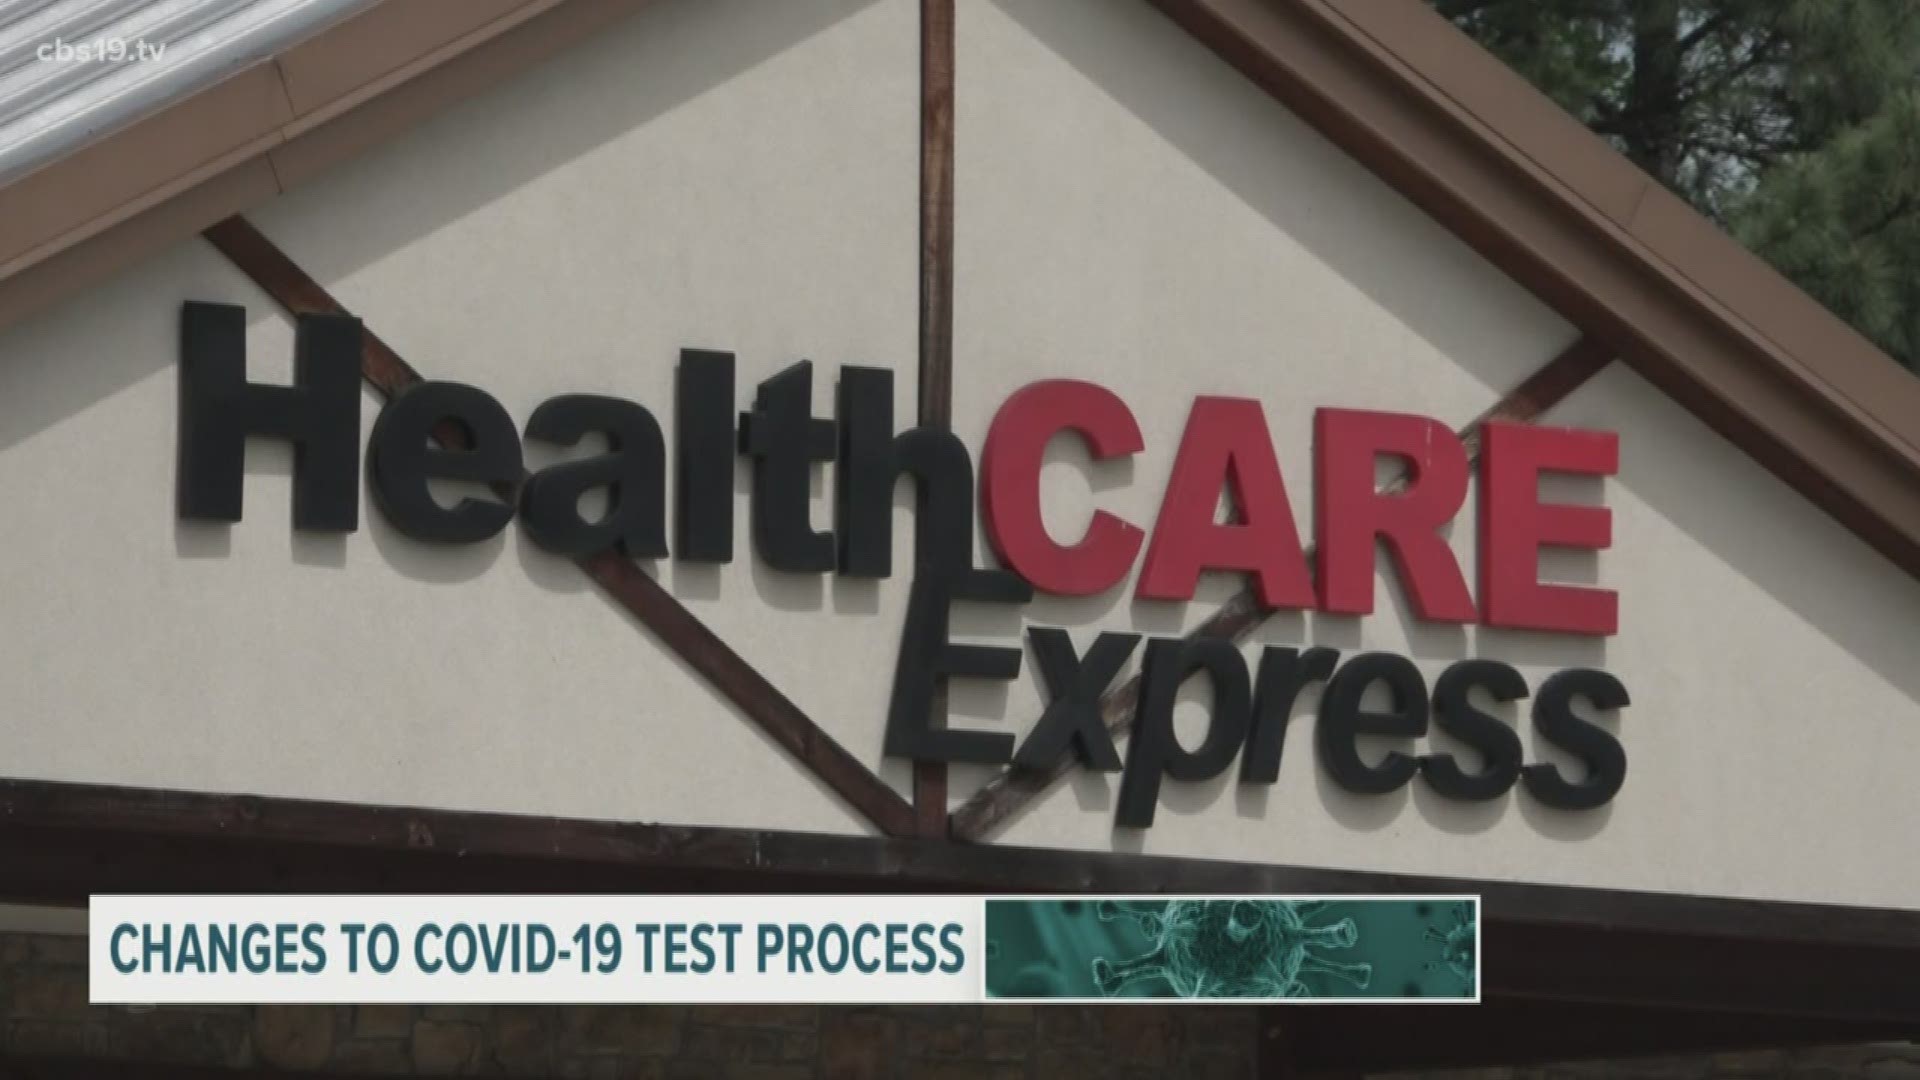 Healthcare Express now offering faster results for COVID-19 testing.